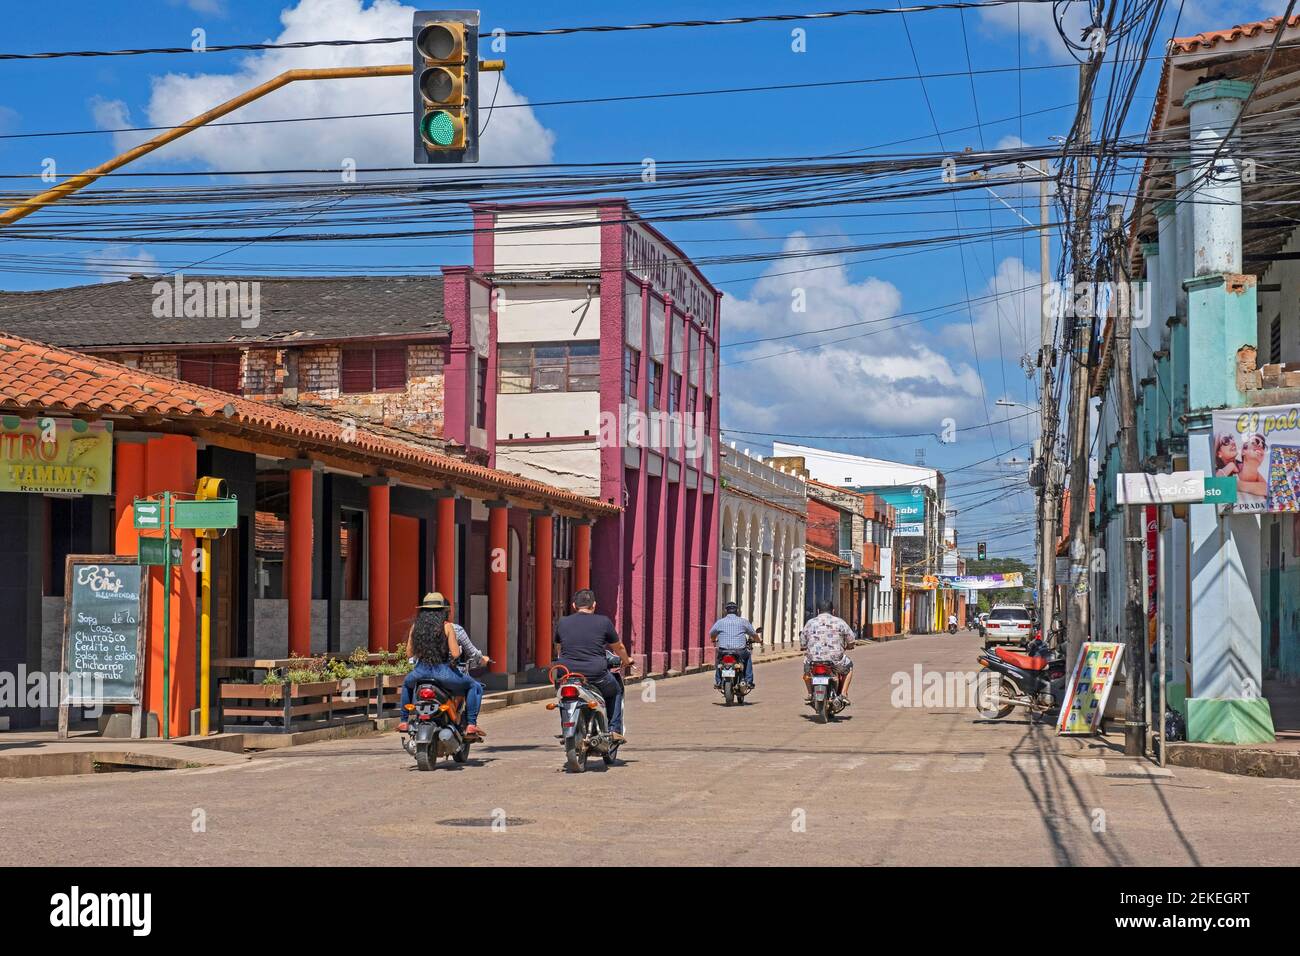 Streetscene showing Bolivians on motorcycles in the colonial city centre of Trinidad in the Amazon, Cercado Province, Beni Department, Bolivia Stock Photo